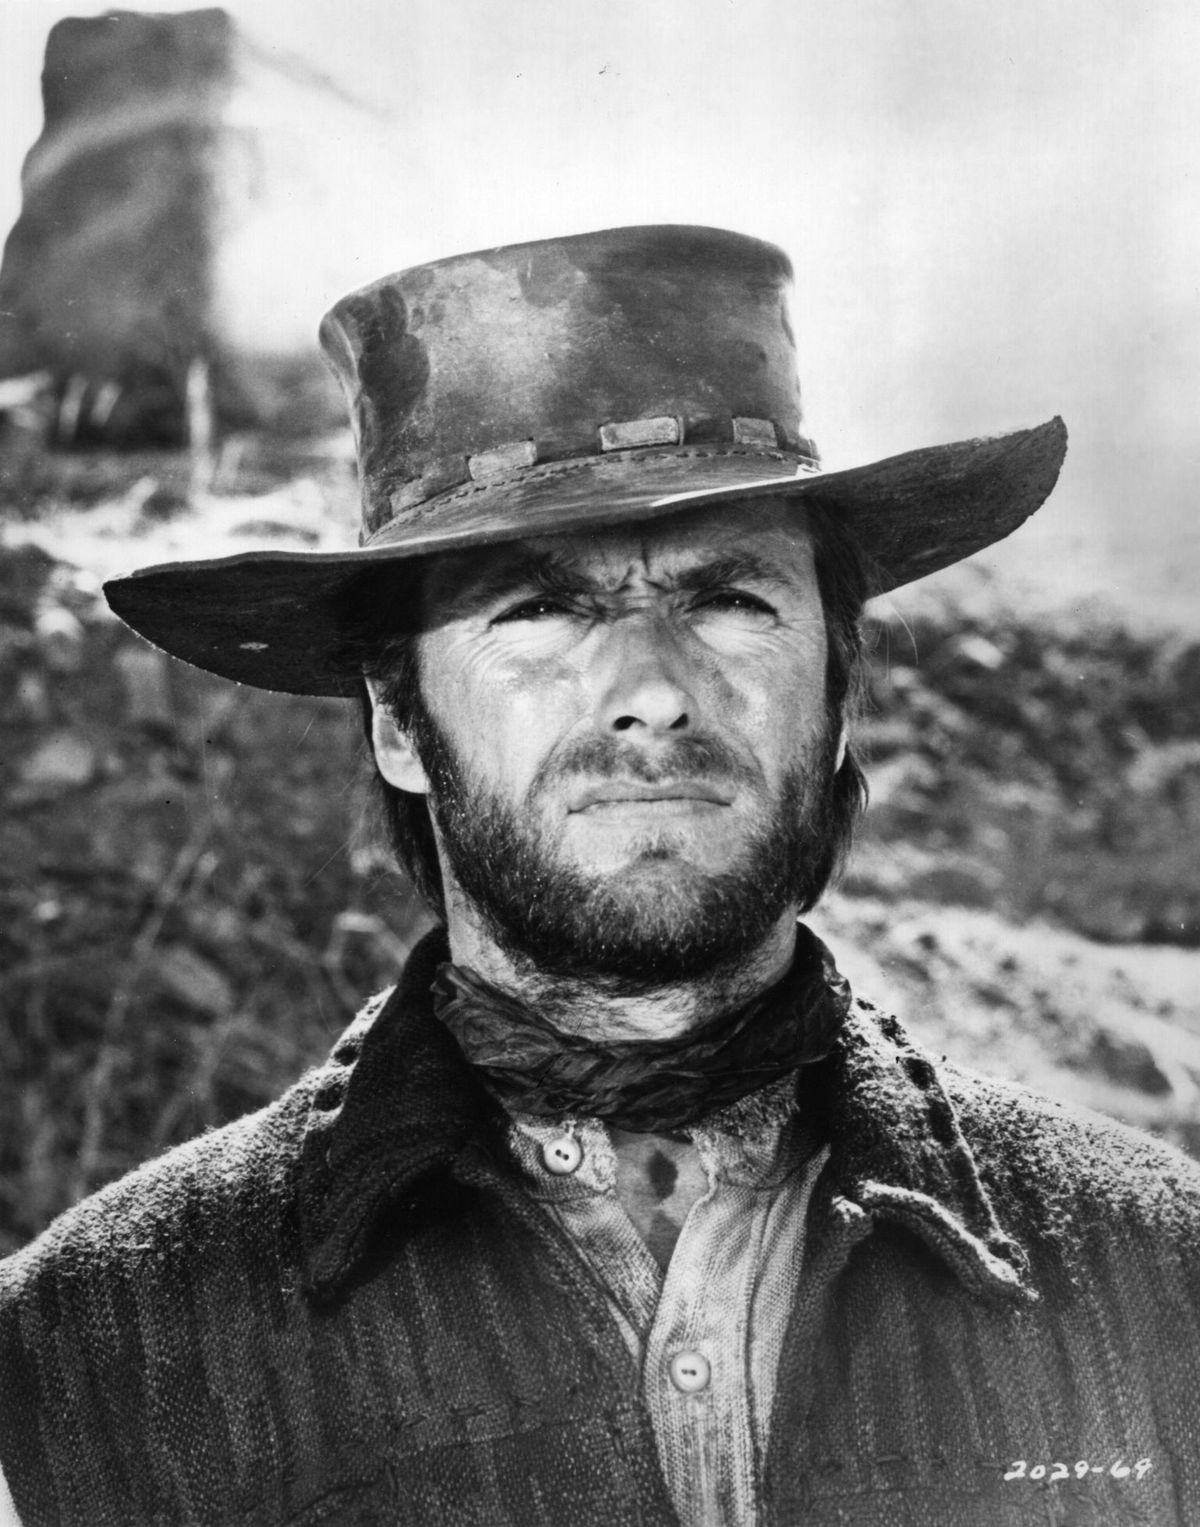 Clint Eastwood in the 1973 film "High Plains Drifter" | Photo: Keystone/Getty Images